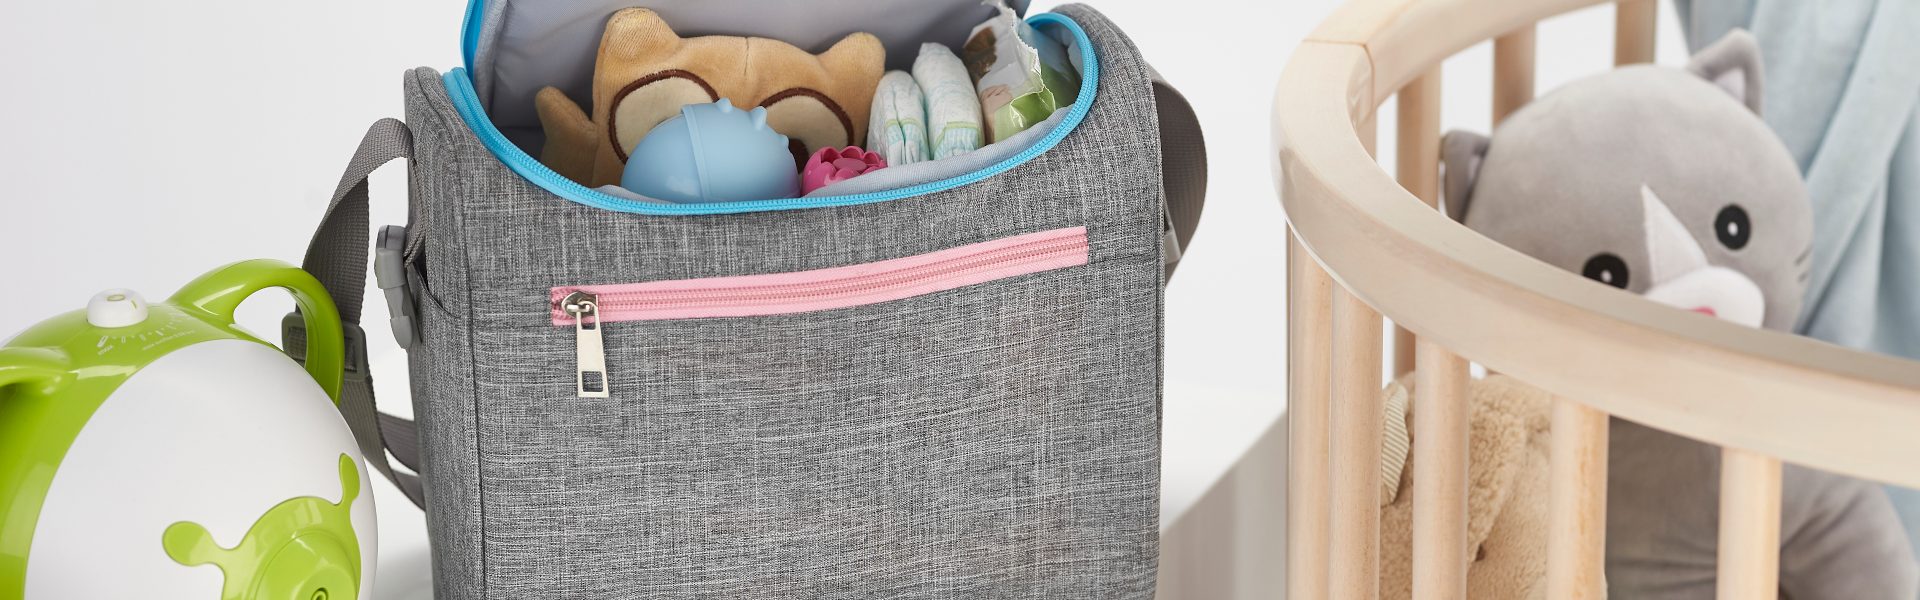 Nosiboo Bag Baby Organizer on a shelf next to the baby cot bed and filled with baby accessories